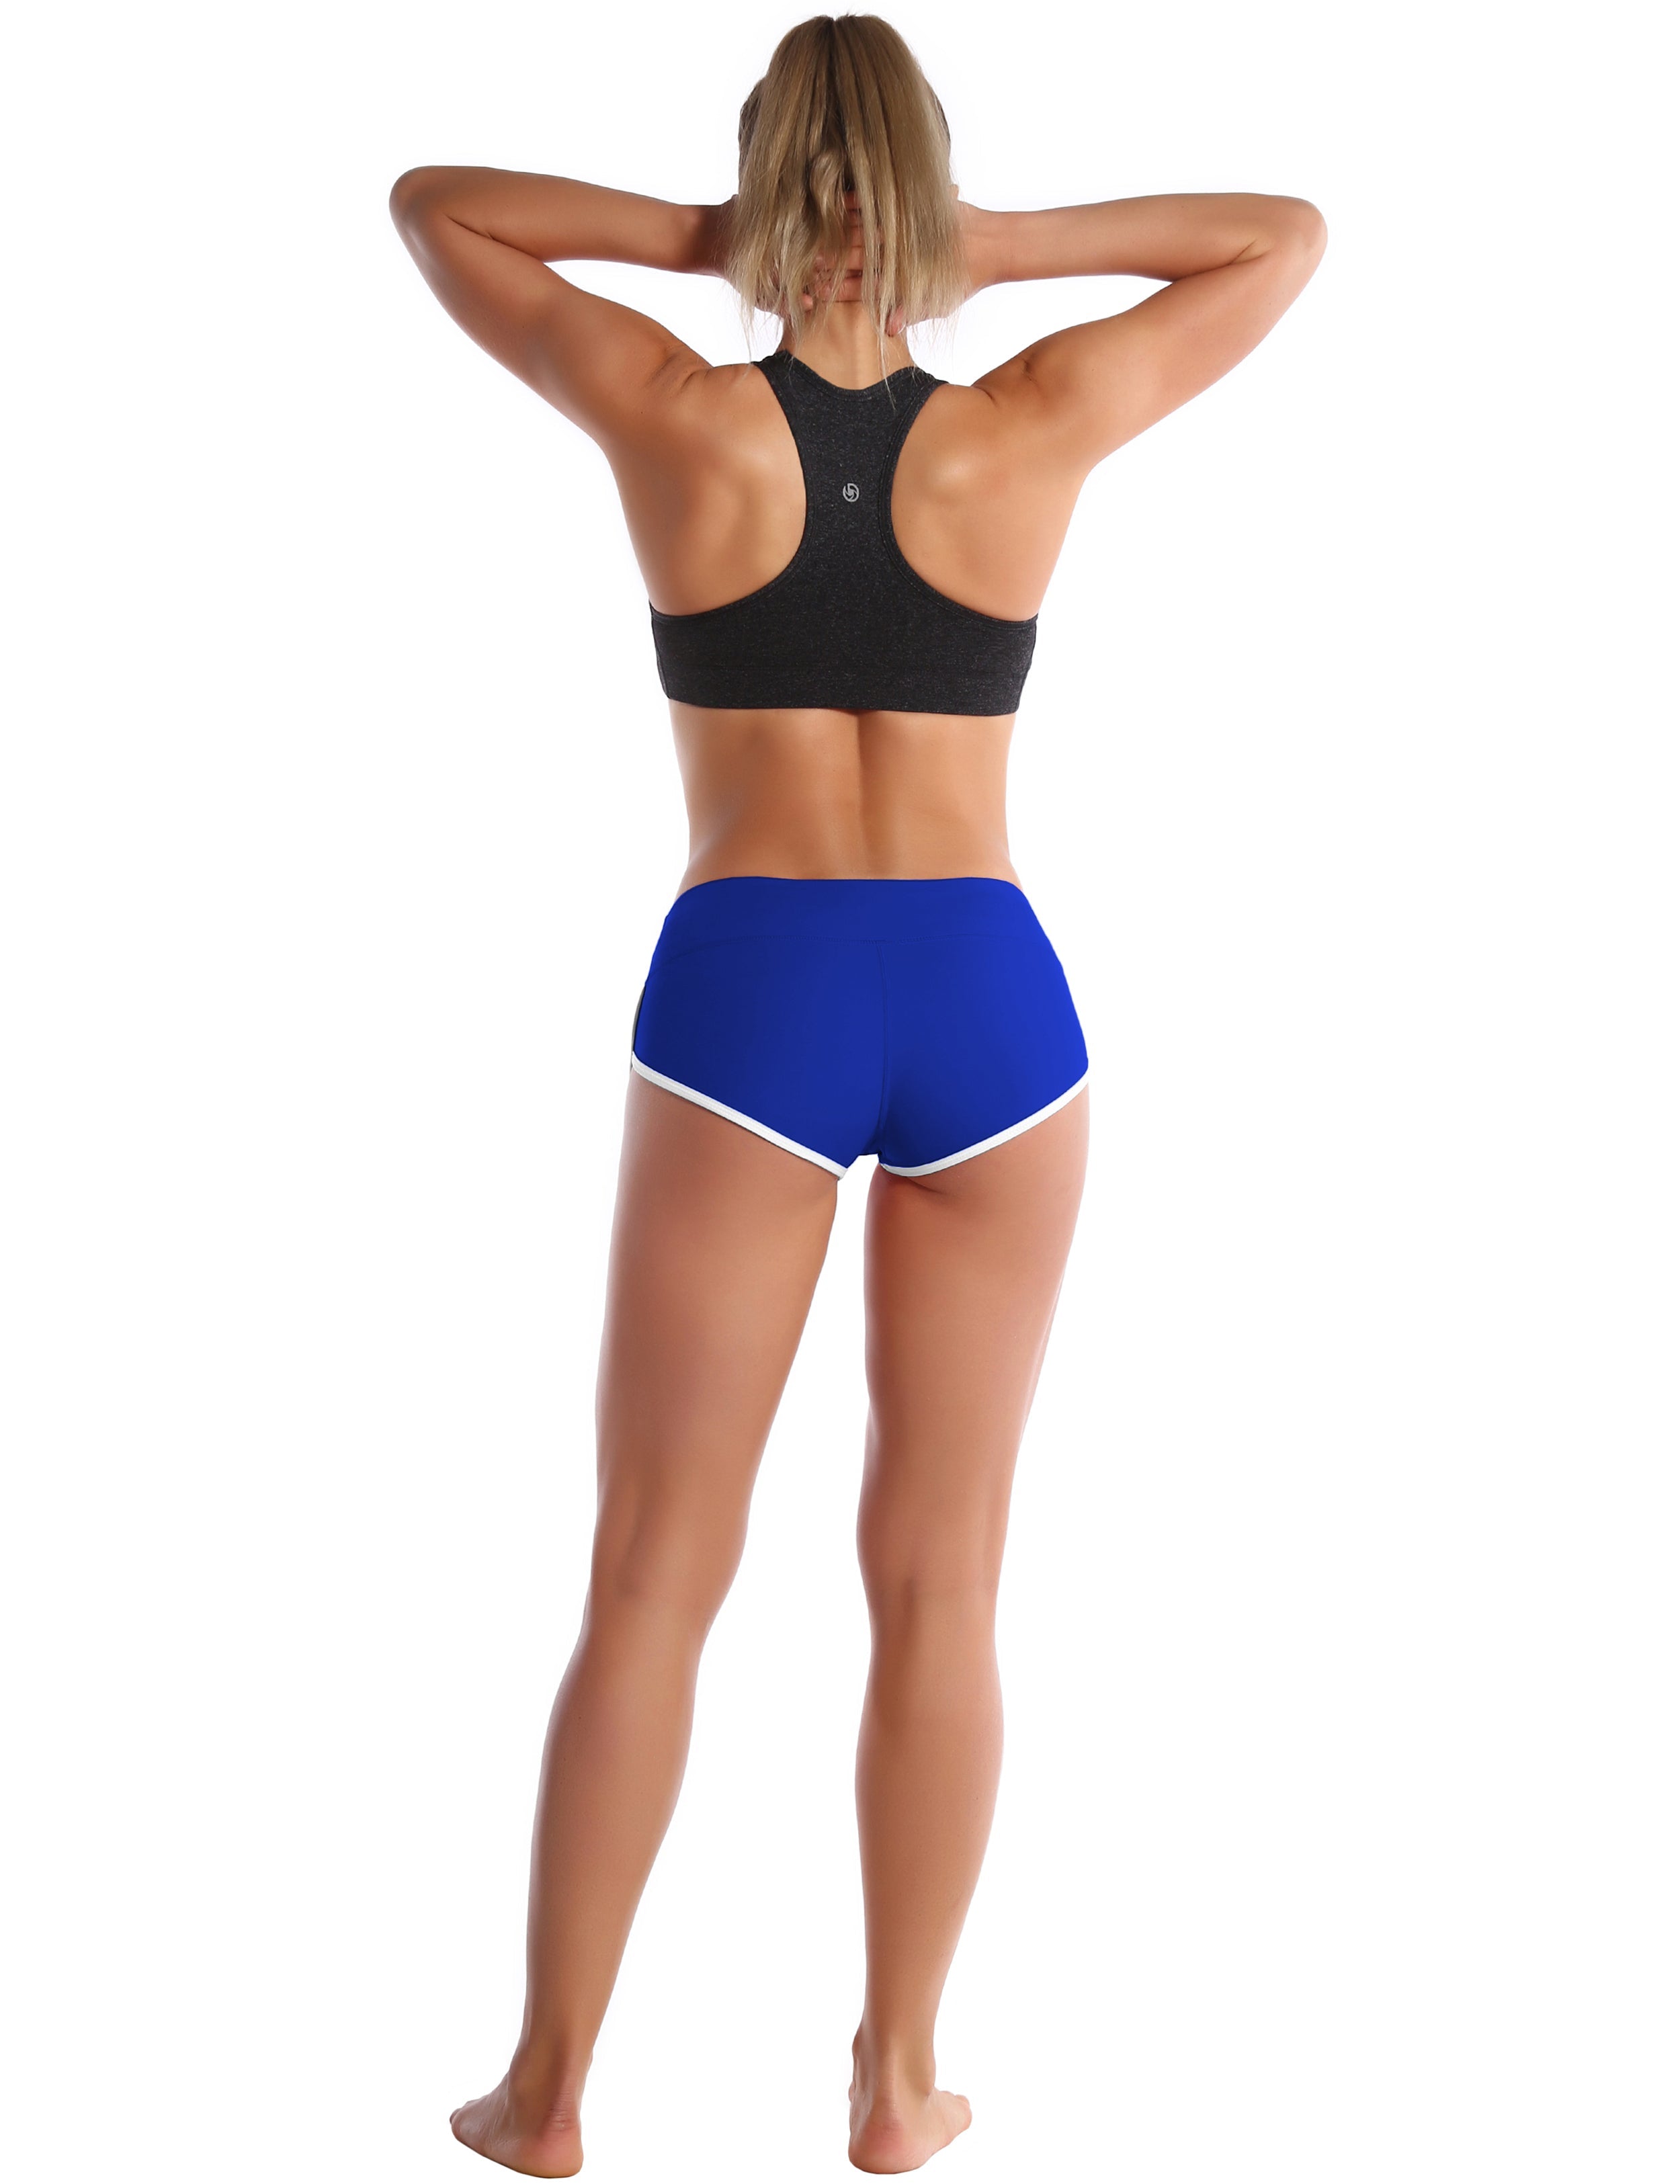 Sexy Booty Yoga Shorts navy Sleek, soft, smooth and totally comfortable: our newest sexy style is here. Softest-ever fabric High elasticity High density 4-way stretch Fabric doesn't attract lint easily No see-through Moisture-wicking Machine wash 75%Nylon/25%Spandex